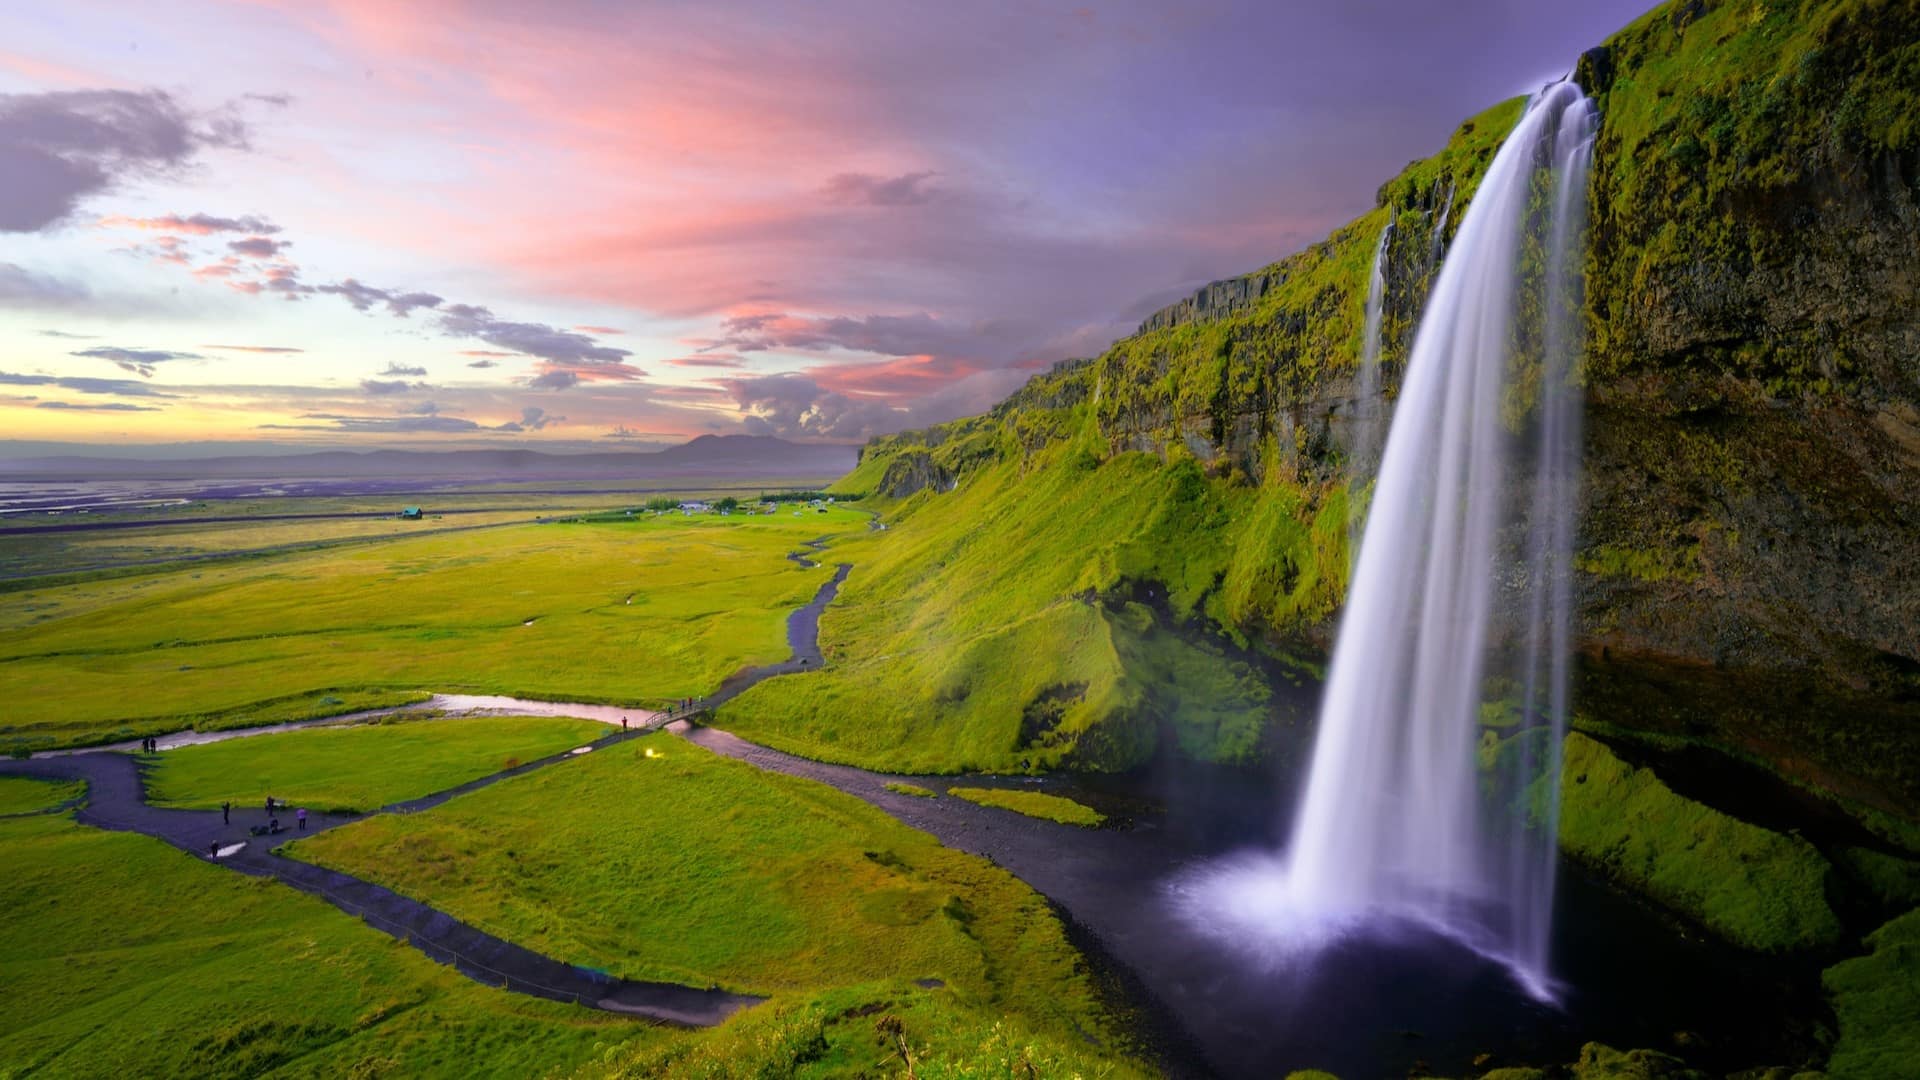 Image: A waterfall in Iceland sits in the foreground, with a striking sunset in the background. In the middle lies a vast area, once filled with lush forests, that is now a part of Mossy Earth's reforesting initiatives.